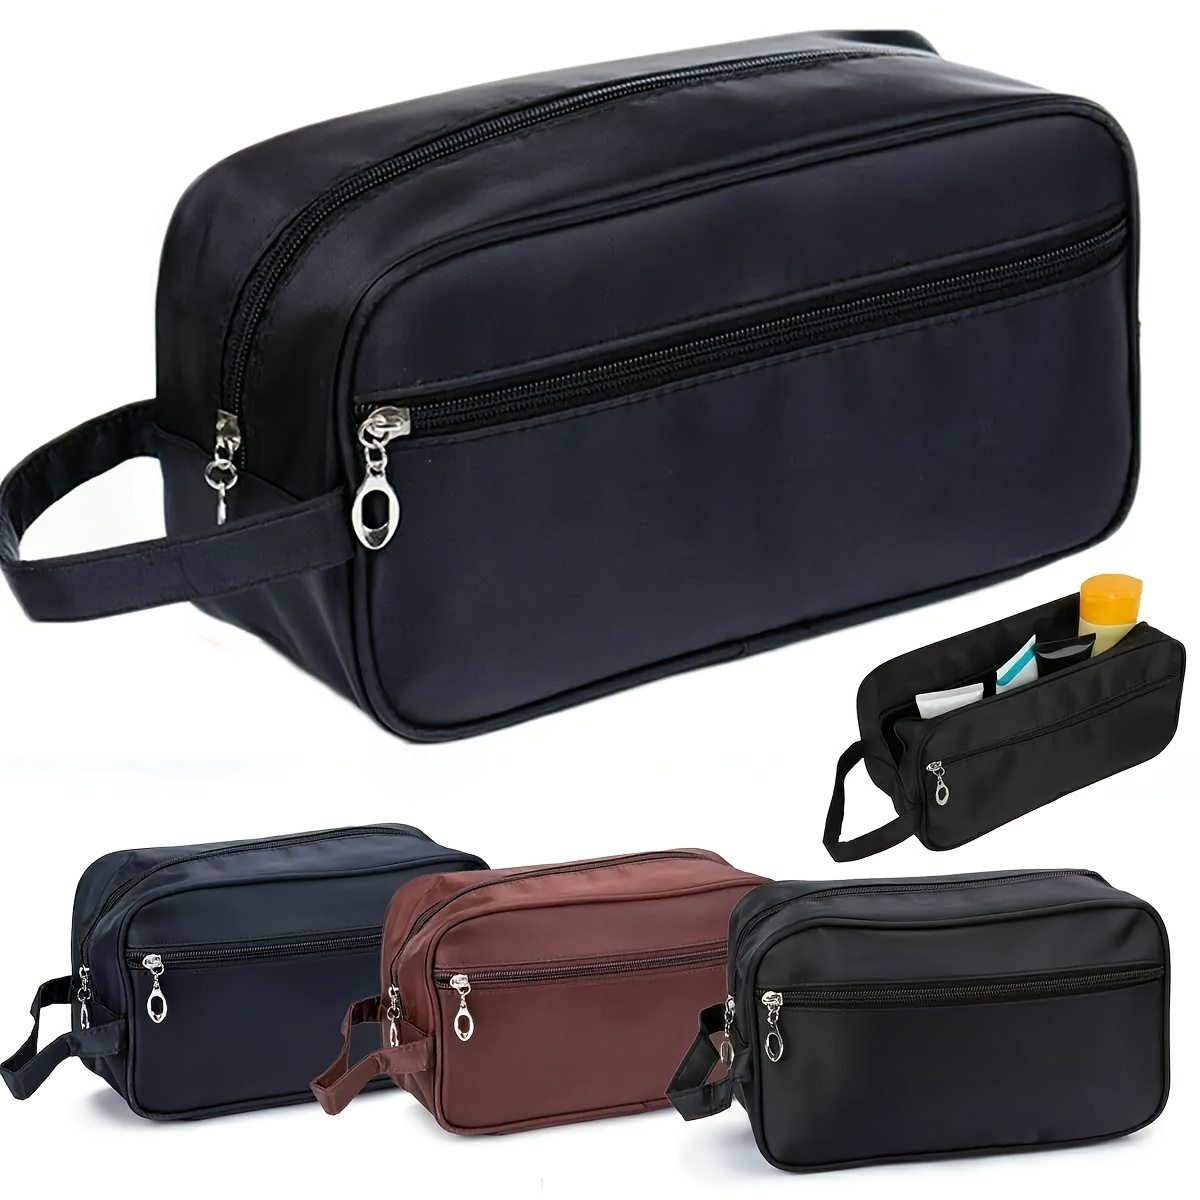 

Unisex Waterproof Toiletry Bag, Travel Organizer Cosmetic Pouch, Durable Wash Bag For Men And Women, Portable Makeup Case For Business Trips And Vacations